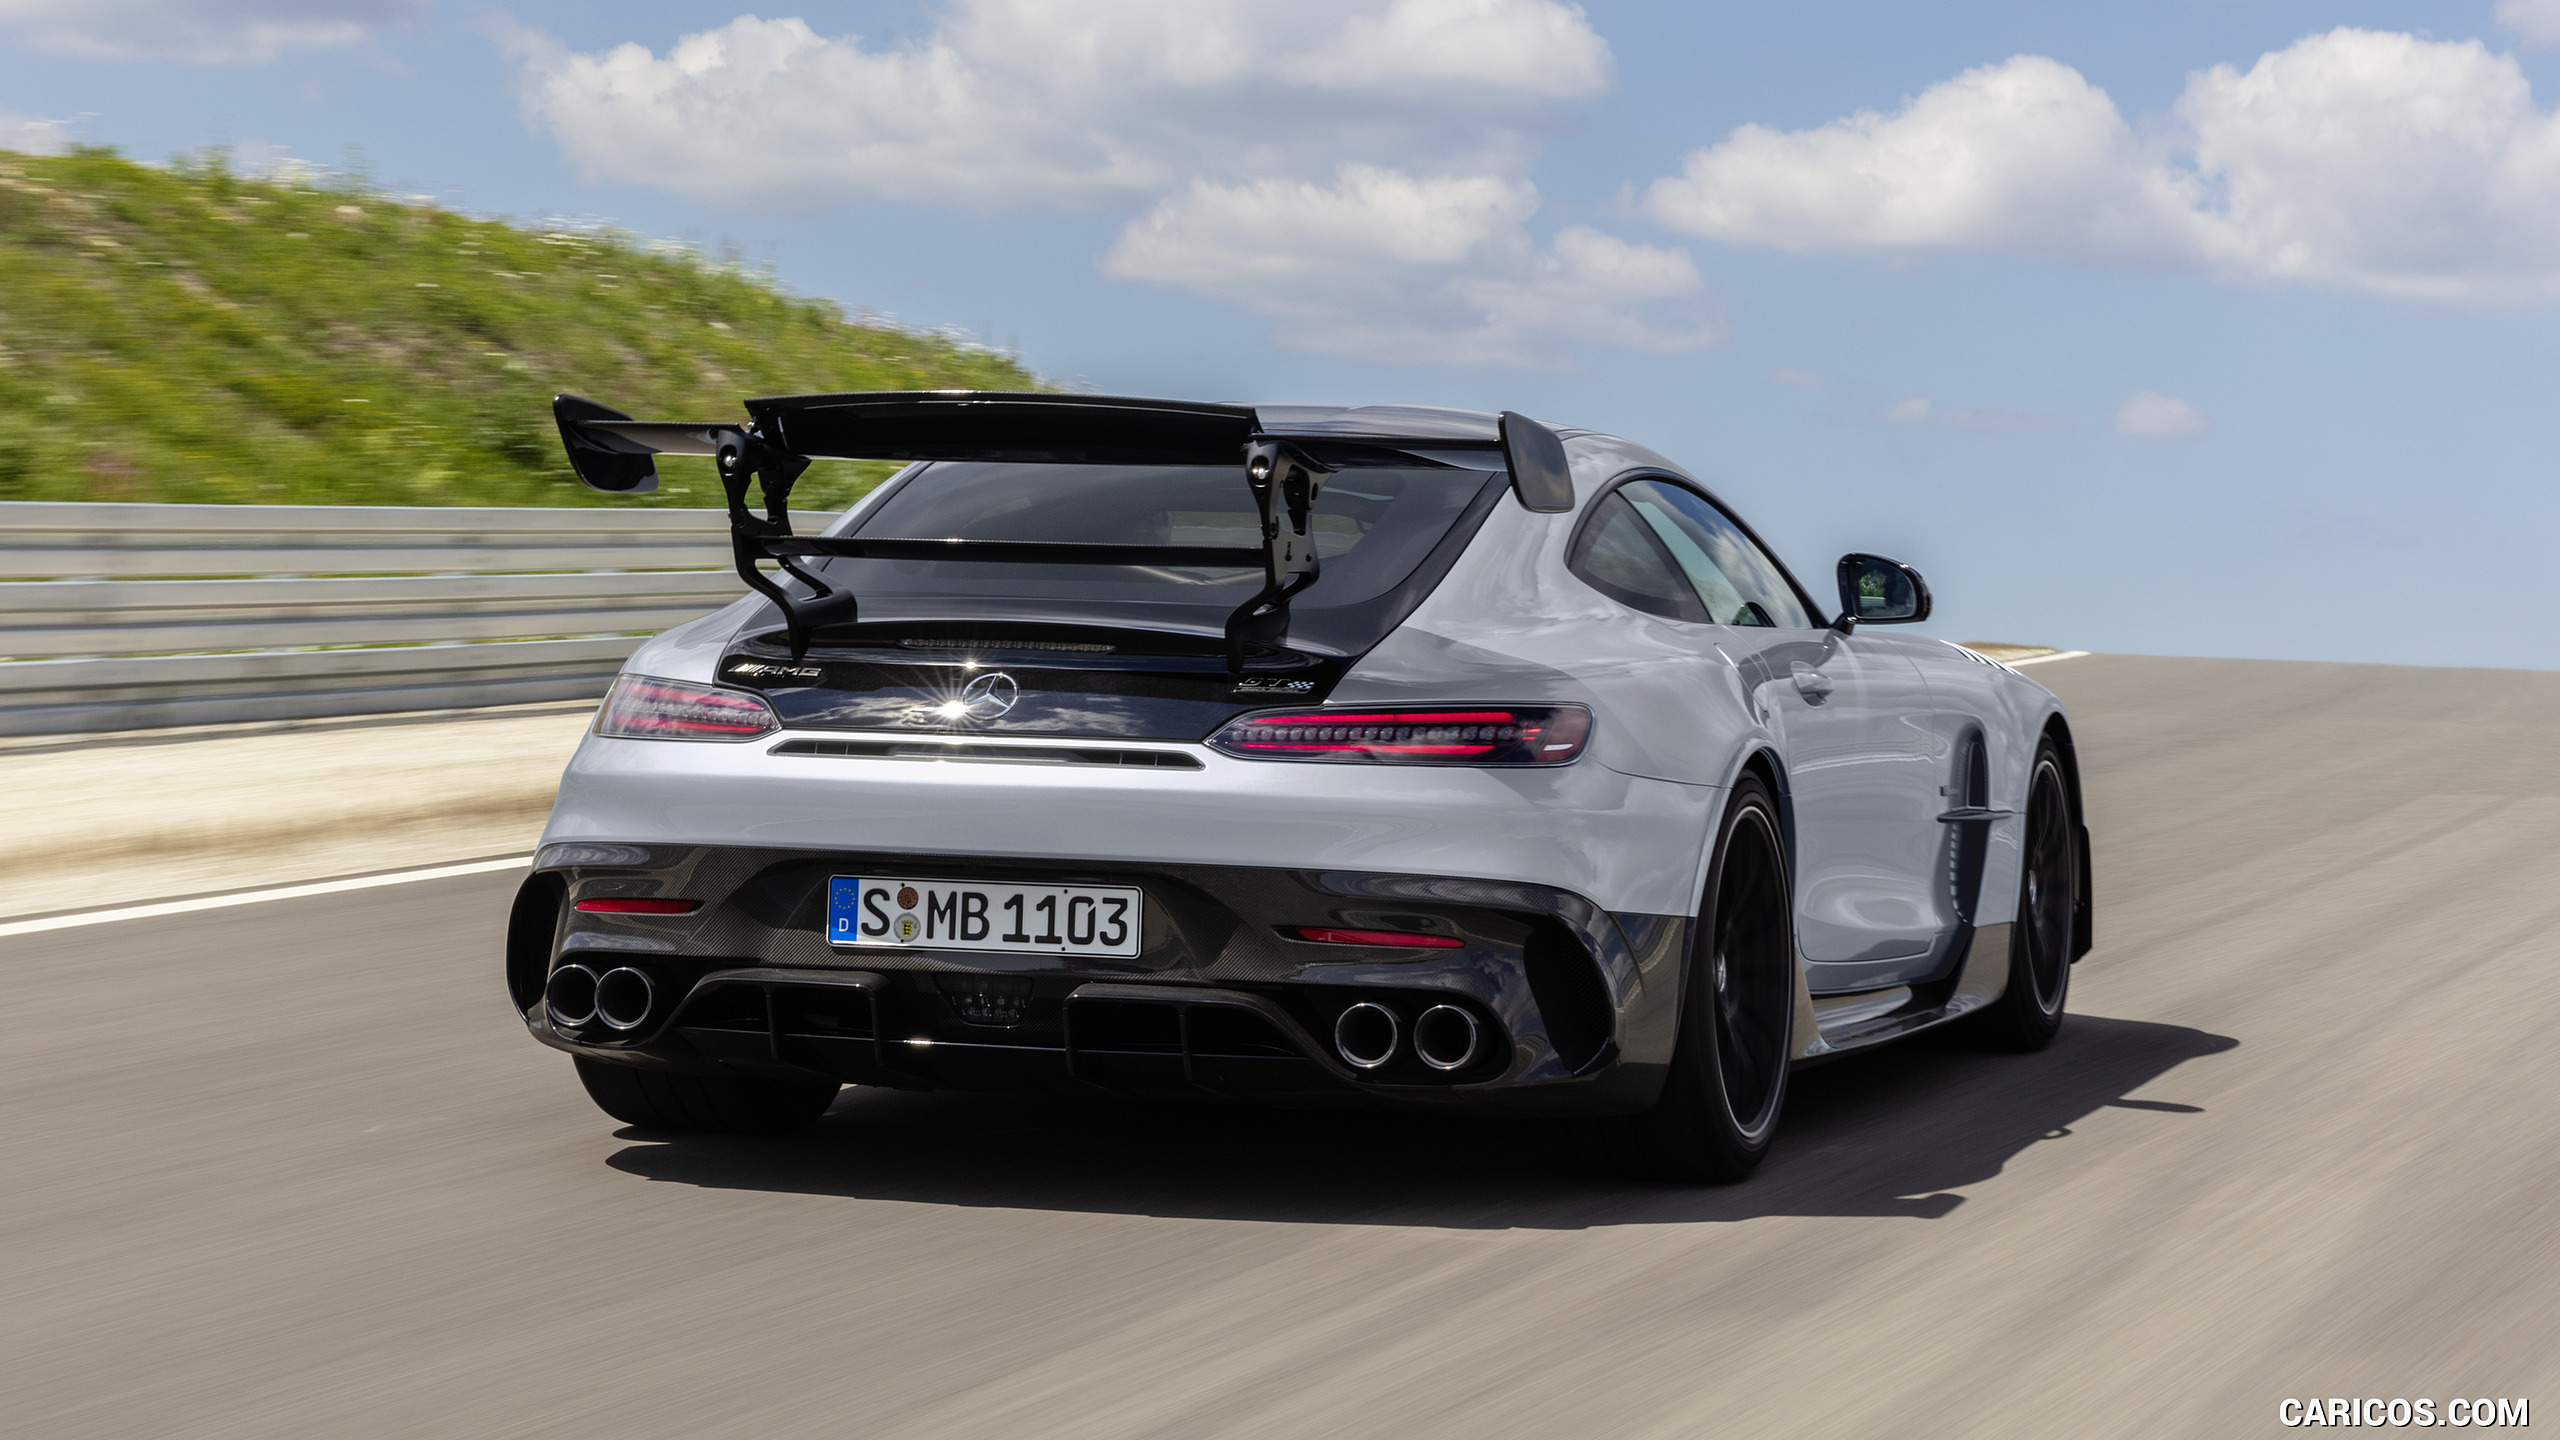 2021 Mercedes-AMG GT Black Series (Color: High Tech Silver) - Rear, #25 of 215